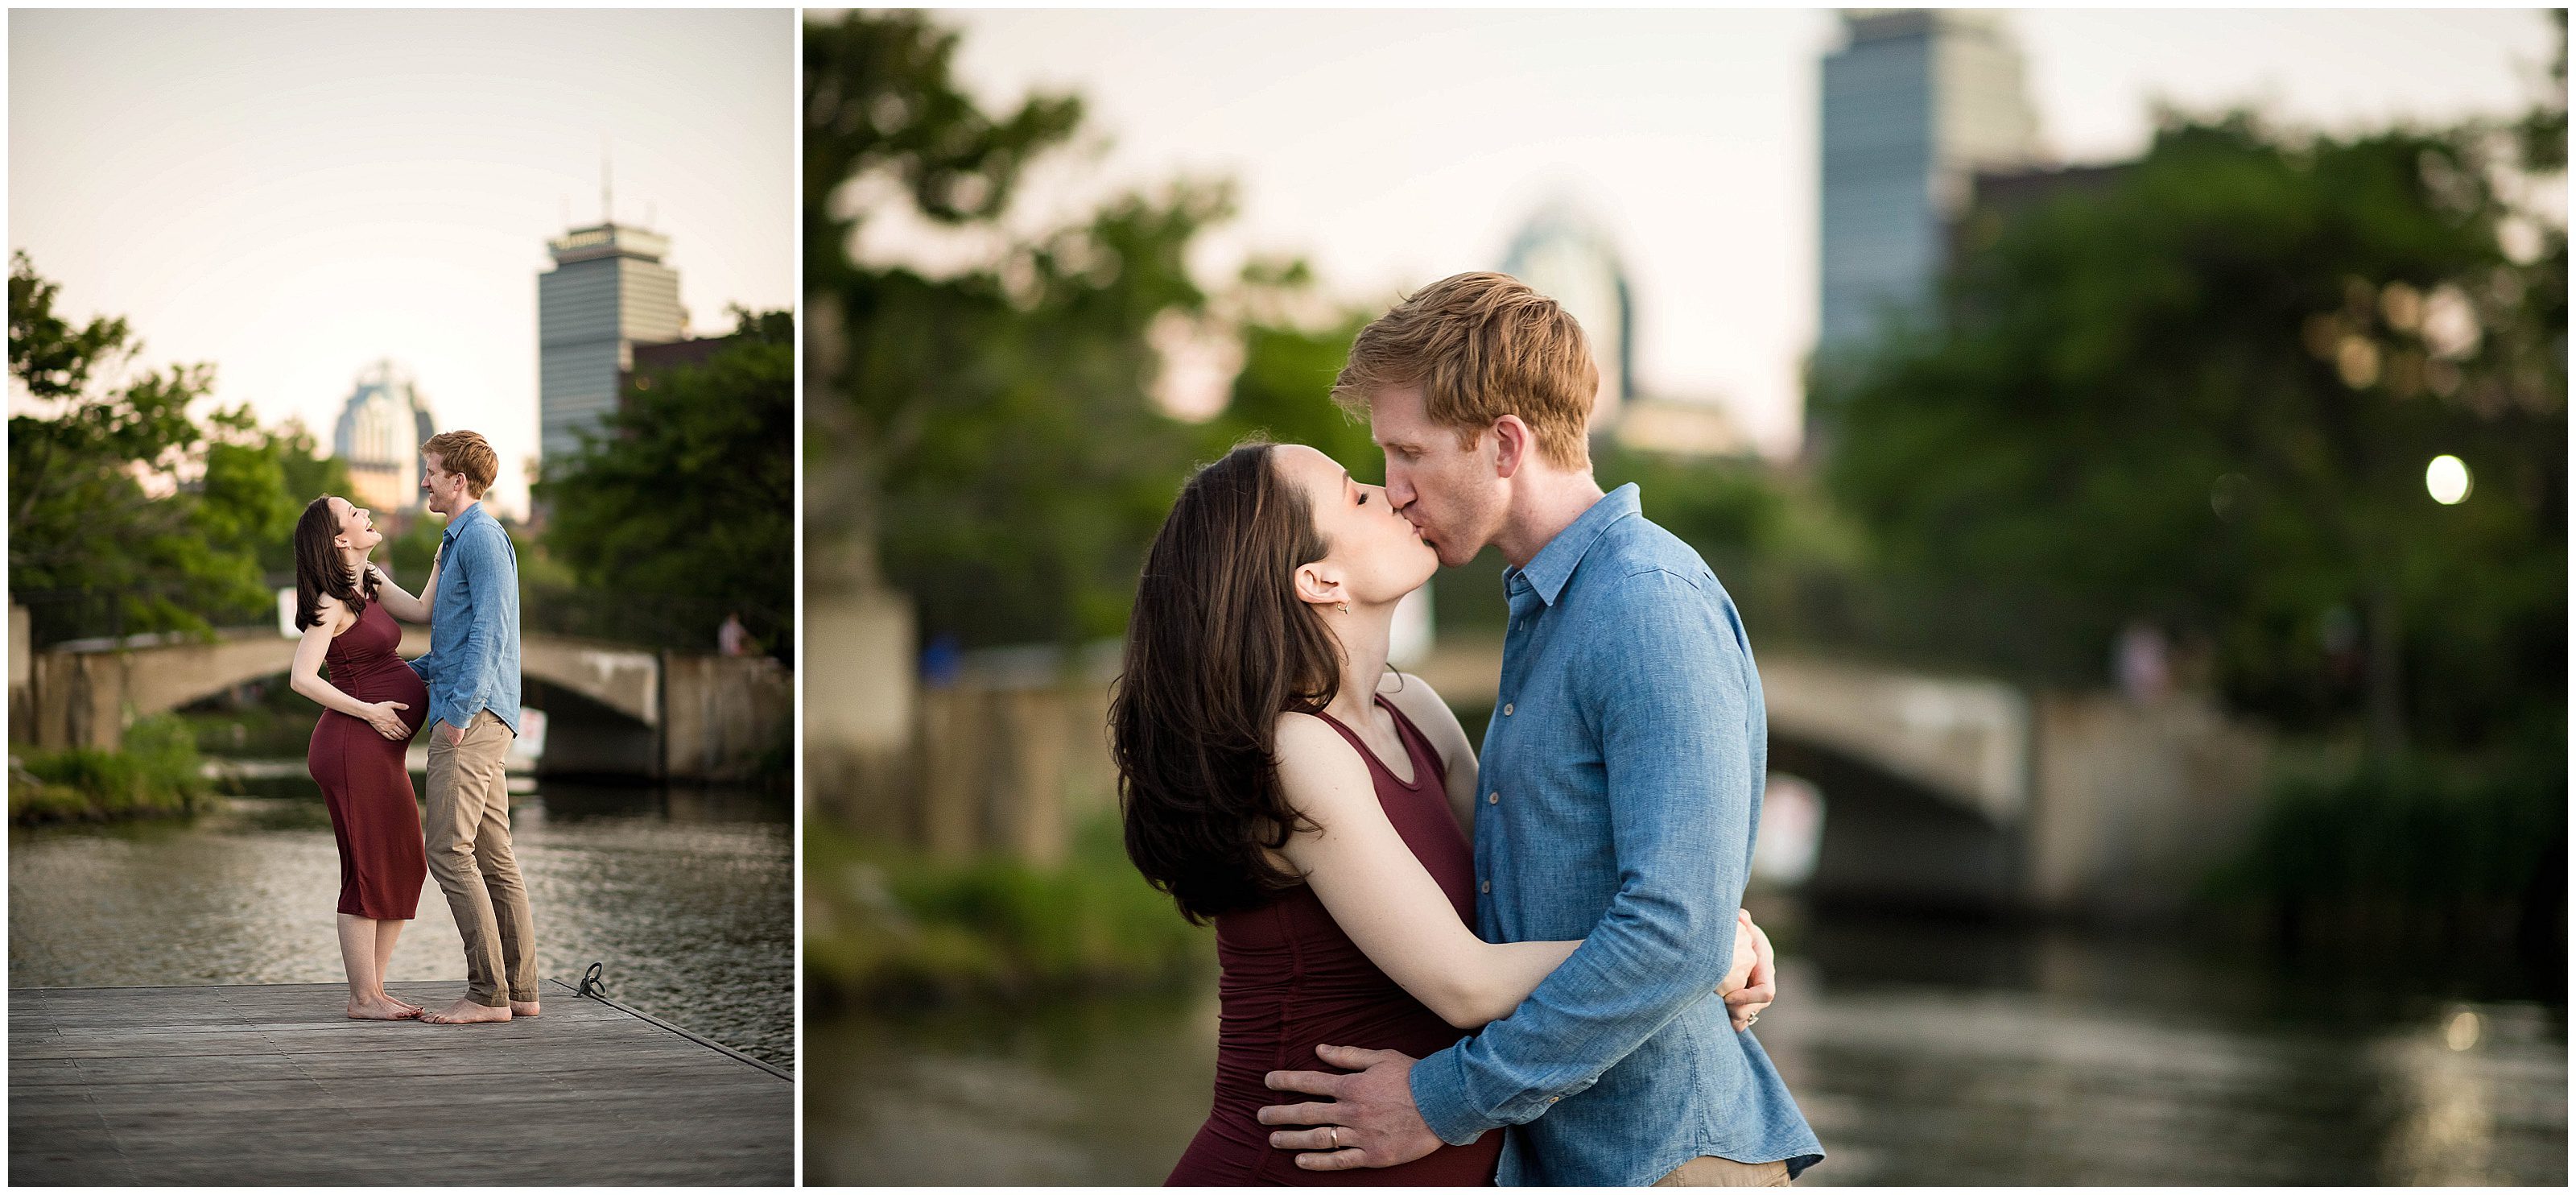 Boston Maternity session by the Charles River with prudential center in background